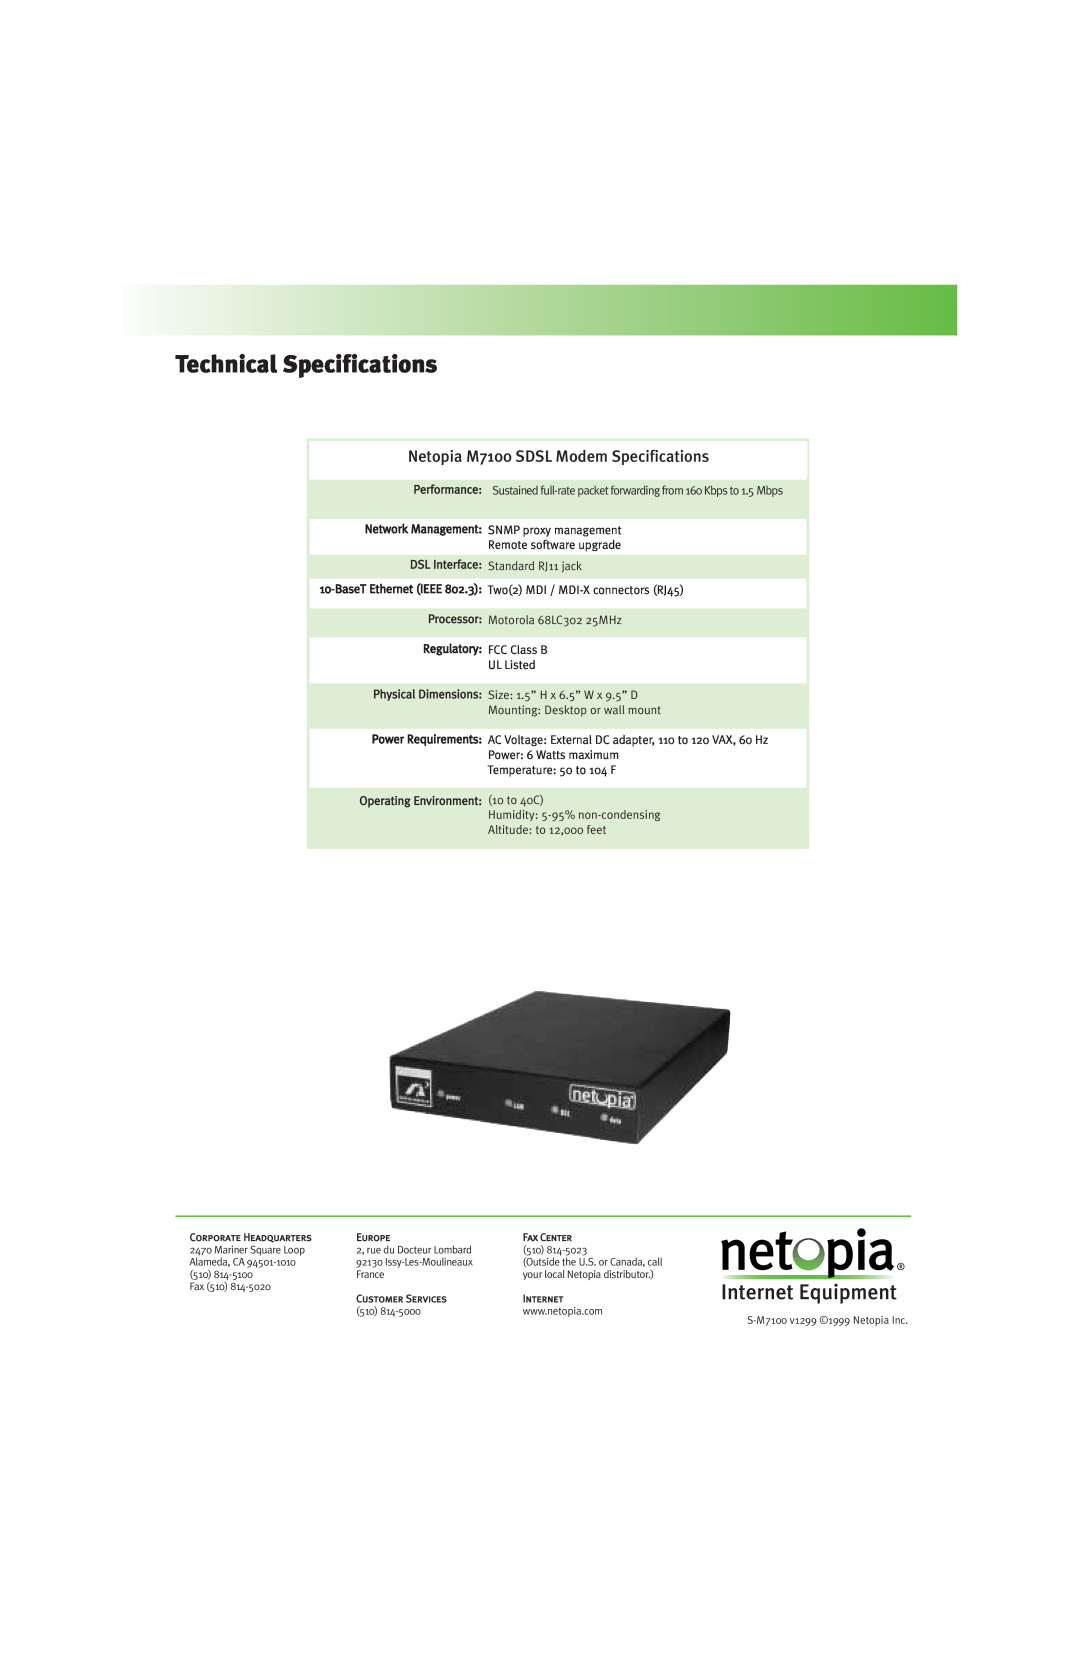 Netopia manual Technical Specifications, Netopia M7100 SDSL Modem Specifications 